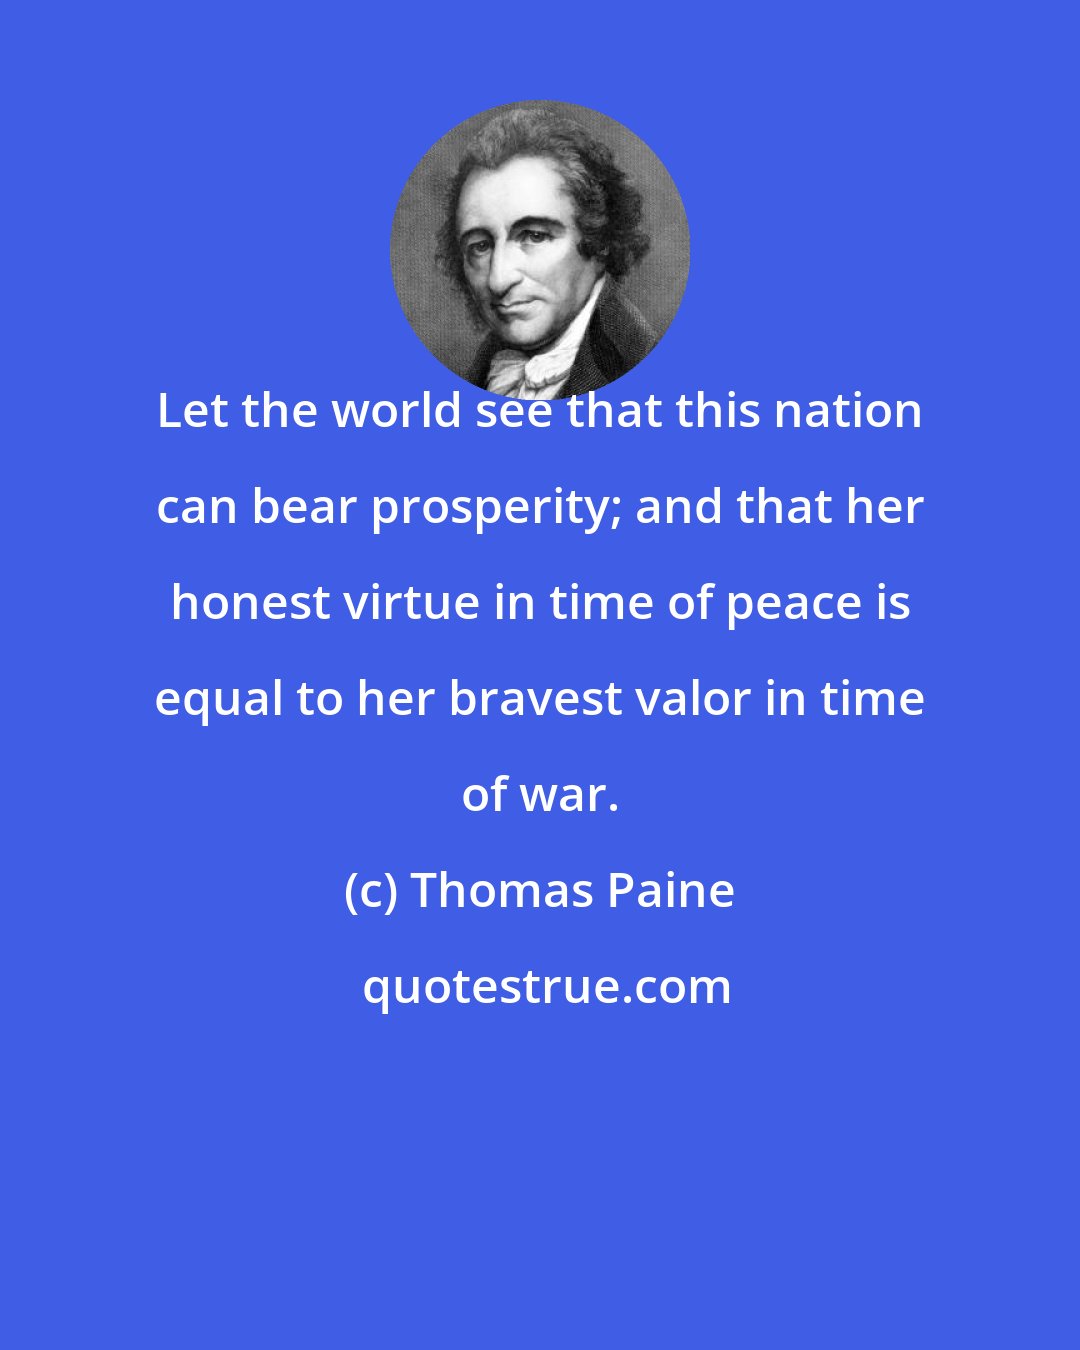 Thomas Paine: Let the world see that this nation can bear prosperity; and that her honest virtue in time of peace is equal to her bravest valor in time of war.